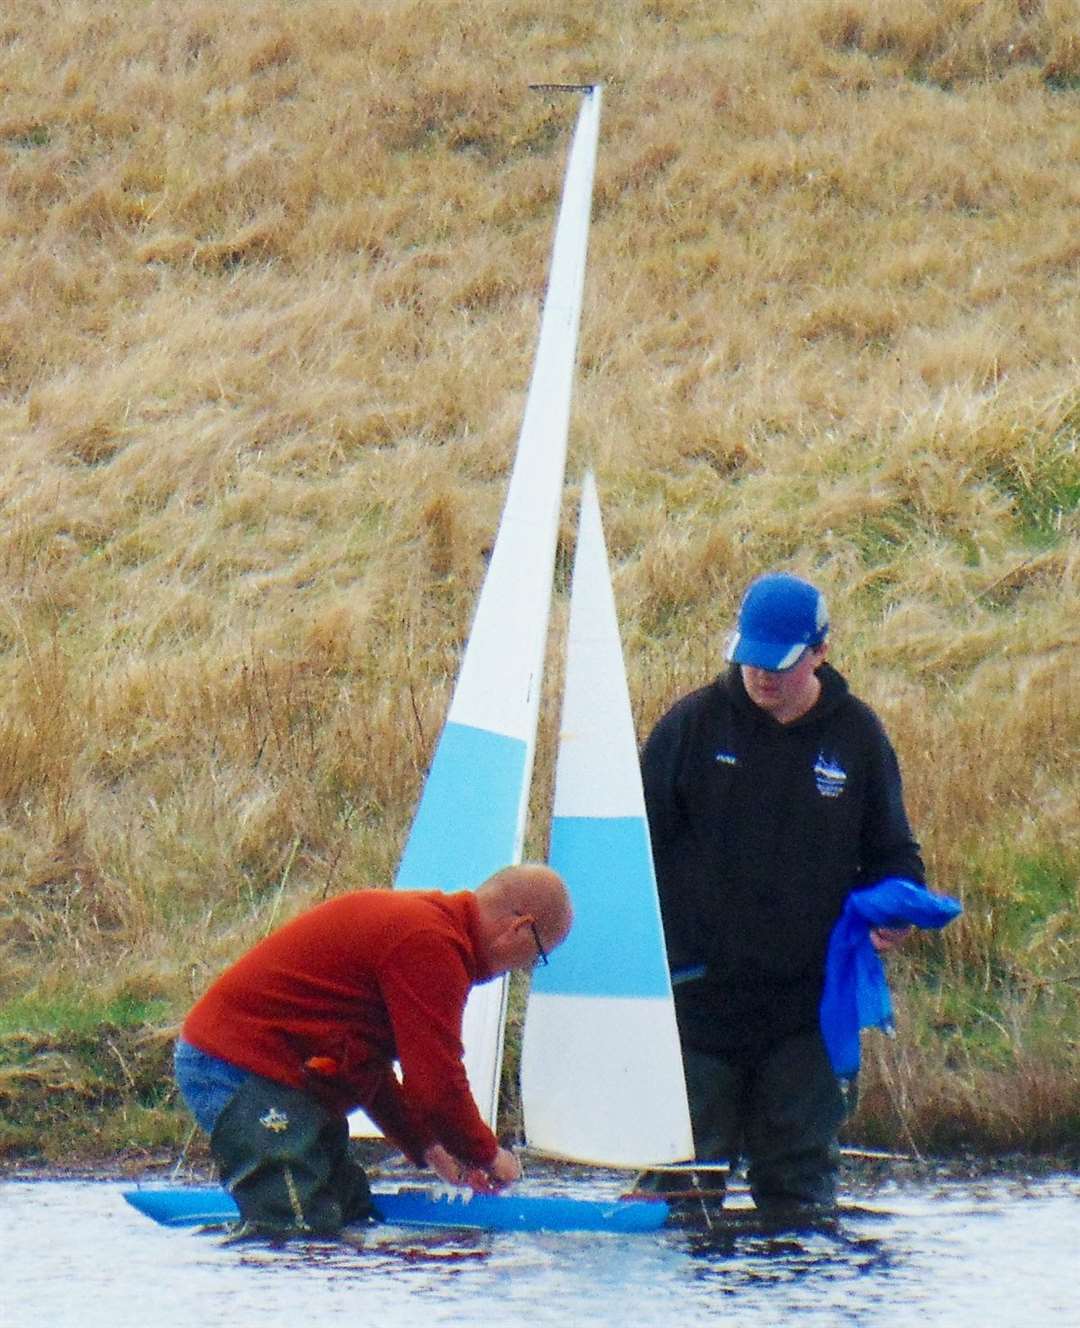 David Sutherland and Innes Scollay fitting a spinnaker.